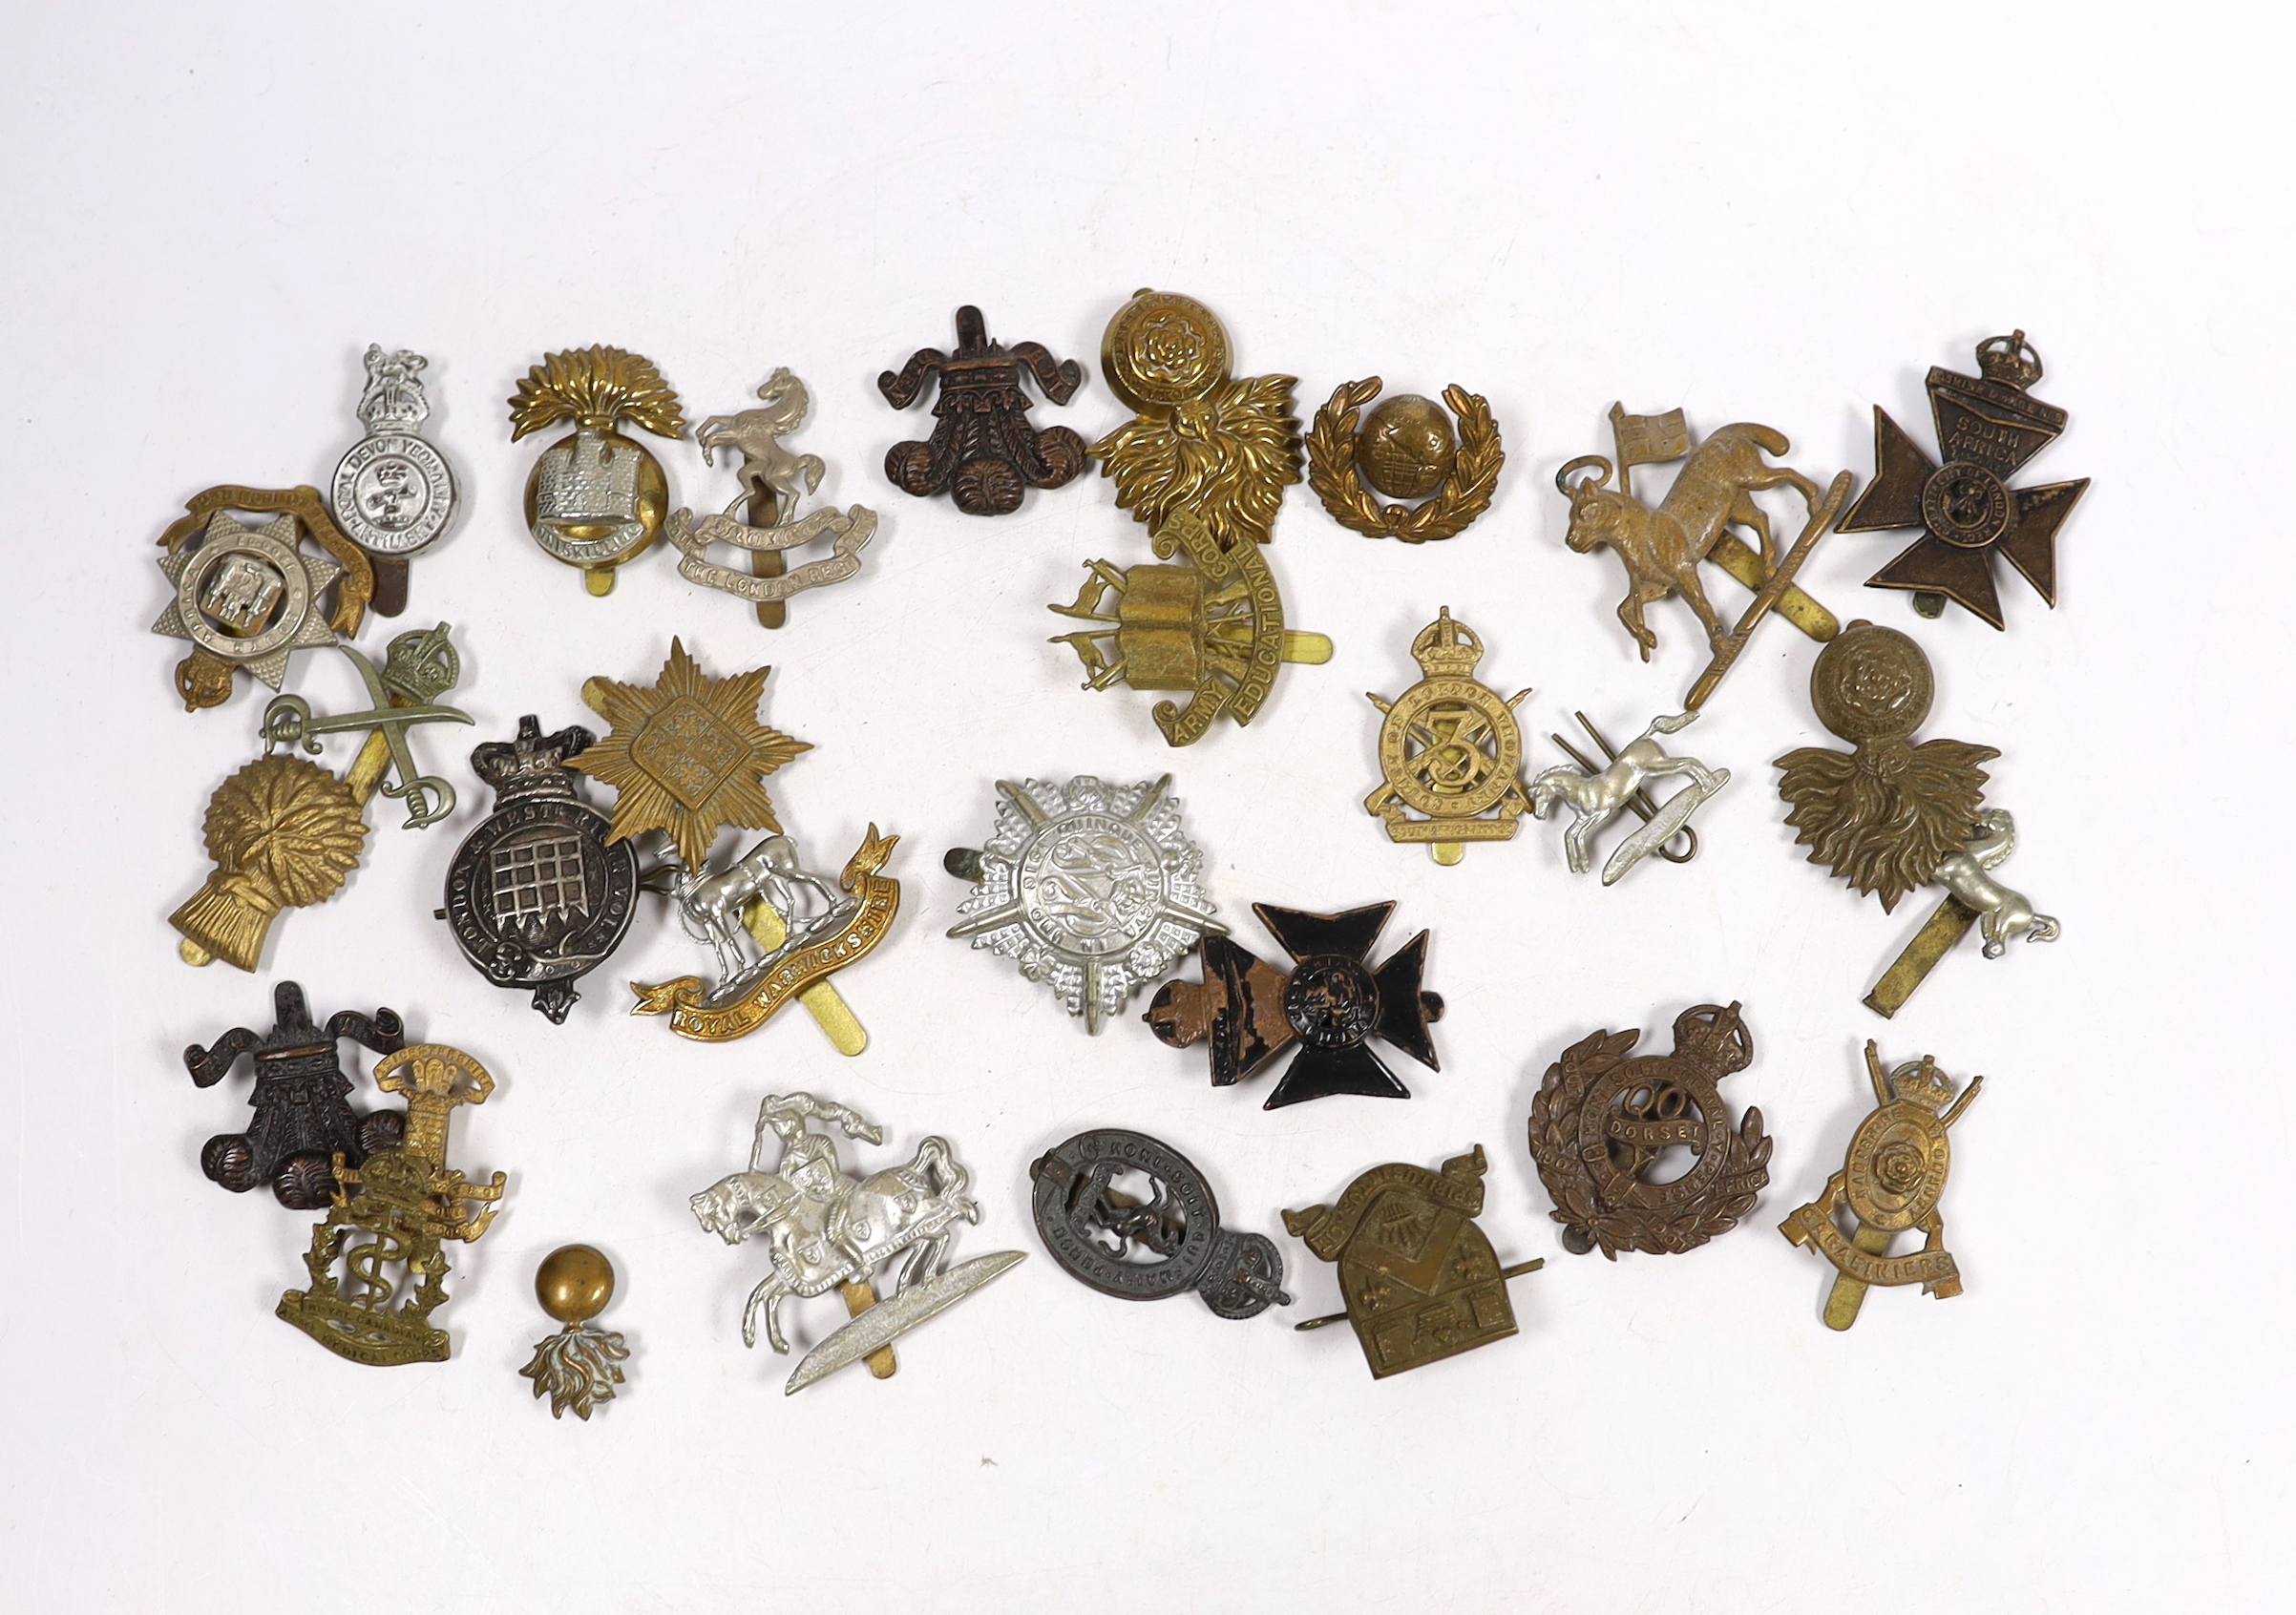 Thirty military cap badges including Royal Warwickshire, Hampshire Yeomanry Carabiniers, Inniskillin, Royal Canadian, AMC, Dorset, Army Educational Corps, London and West Rifle Volunteers, etc.